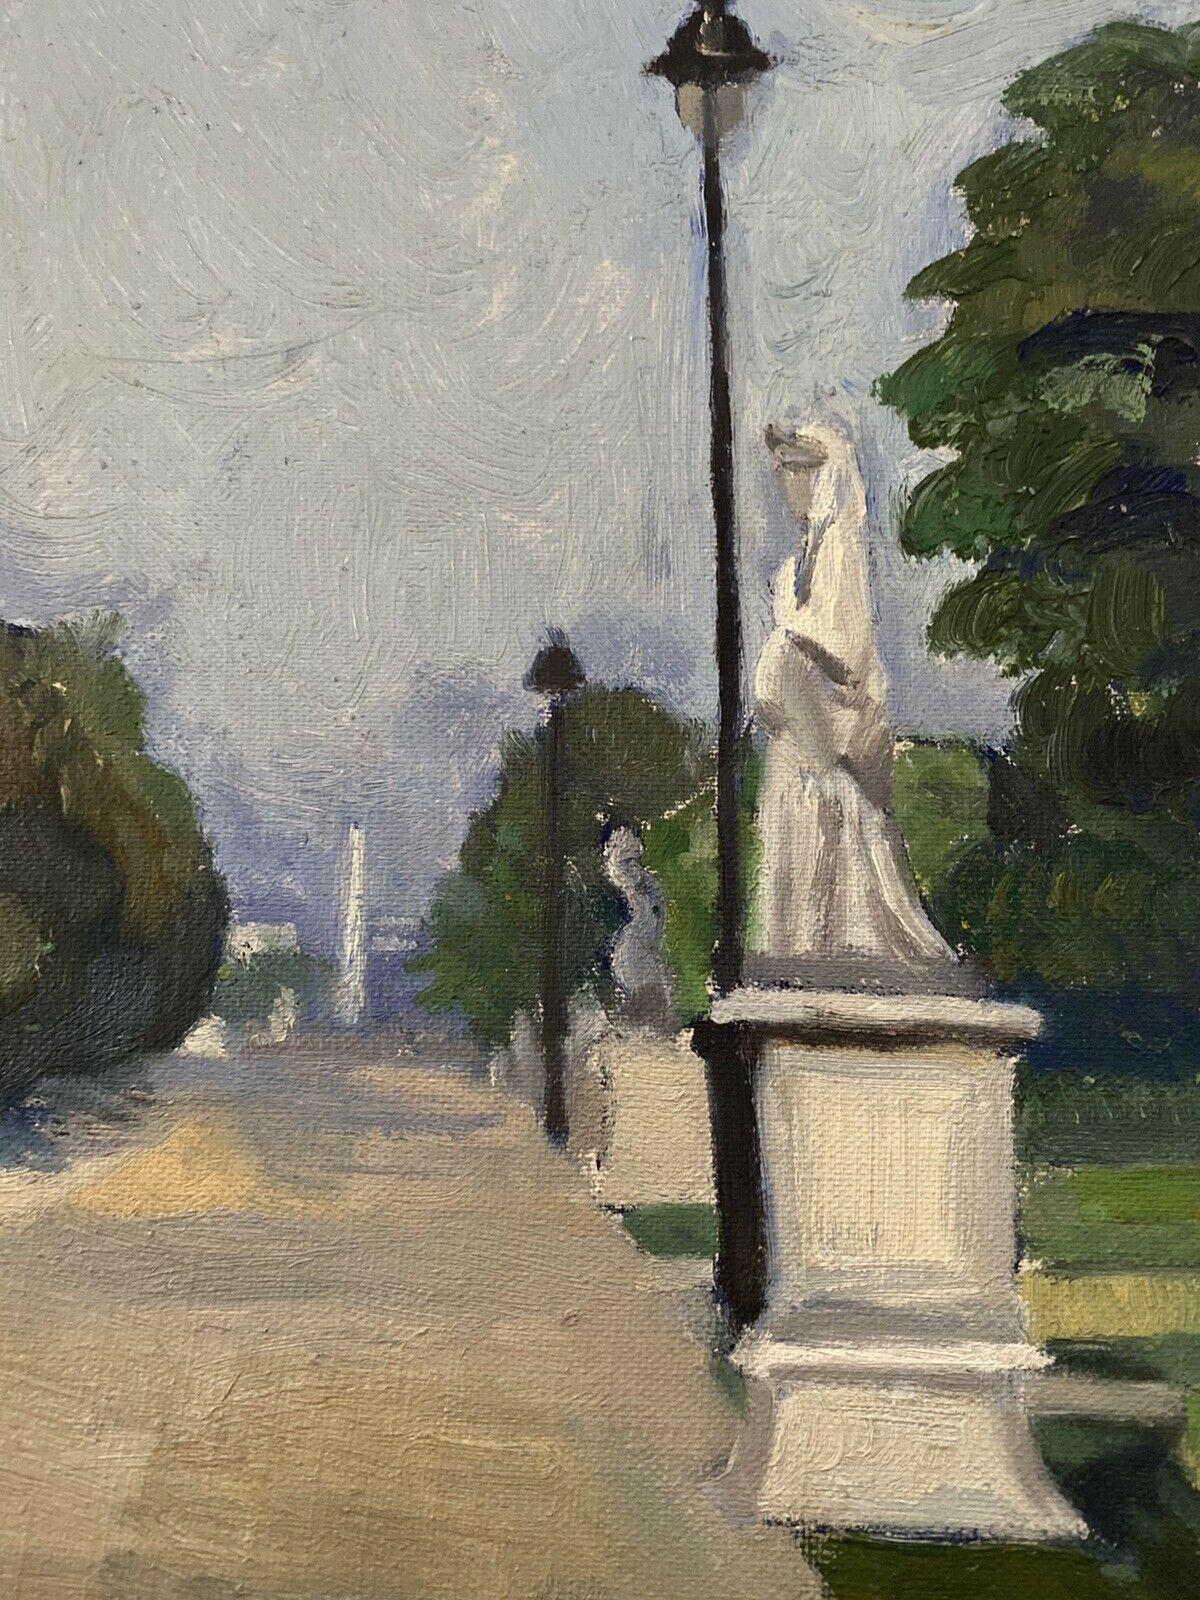 20th CENTURY FRENCH OIL PAINTING - CITY STREET SCENE & PARK WITH STATUES - Painting by GENEVIEVE ZONDERVAN (1922-2013)